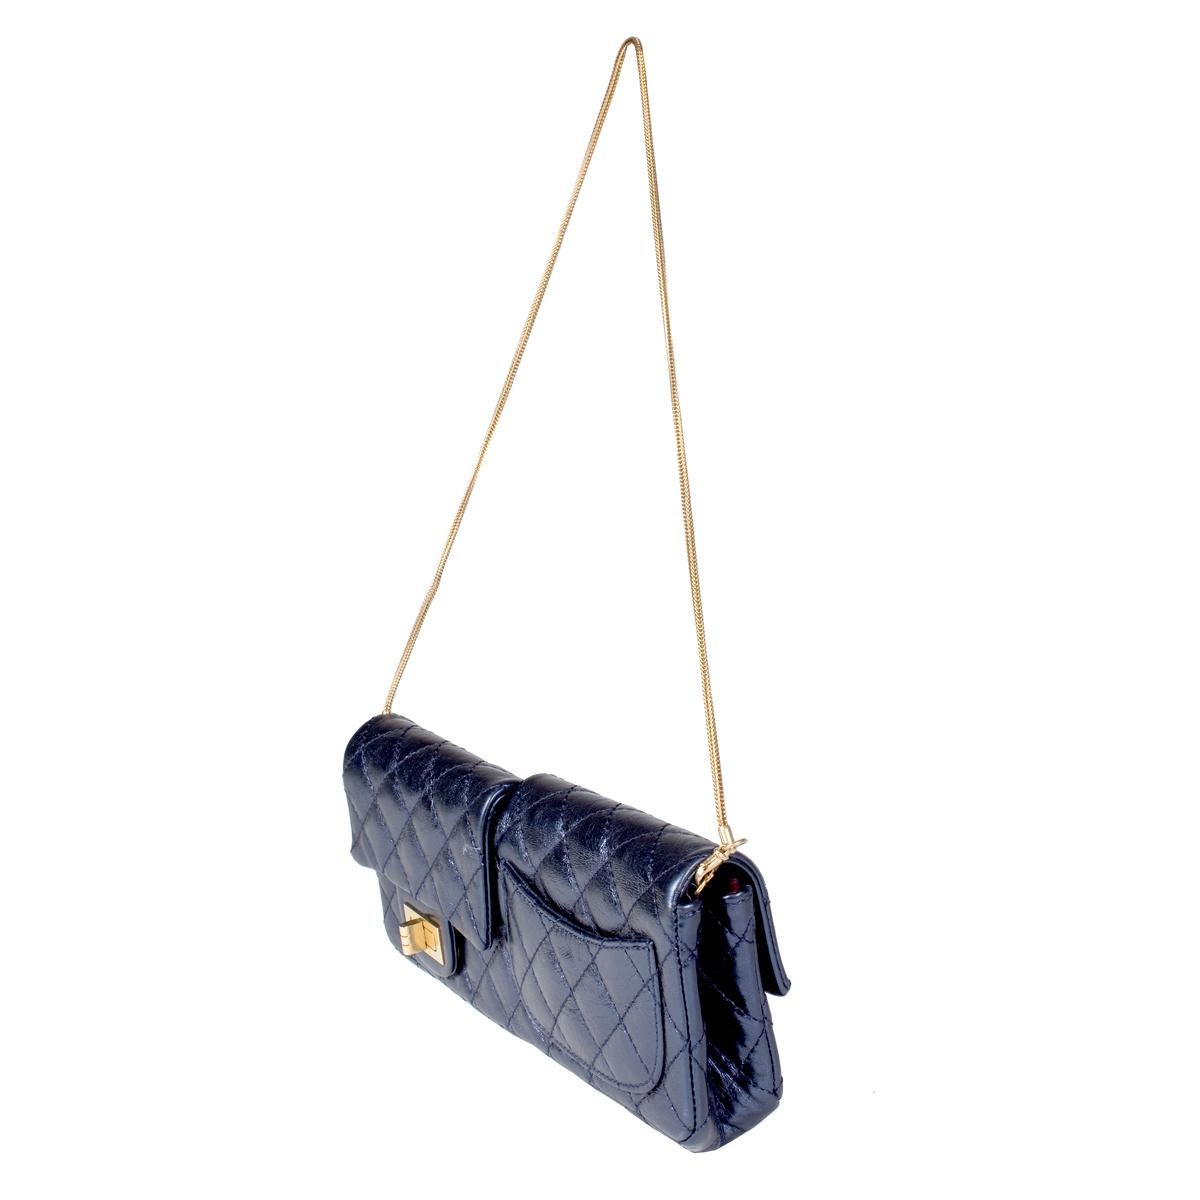 Bag by Chanel from 2008-2009
Navy metallic leather with quilting
Flap closure pockets identical on each side
Gold chain handle
Bordeaux maroon leather interior
10